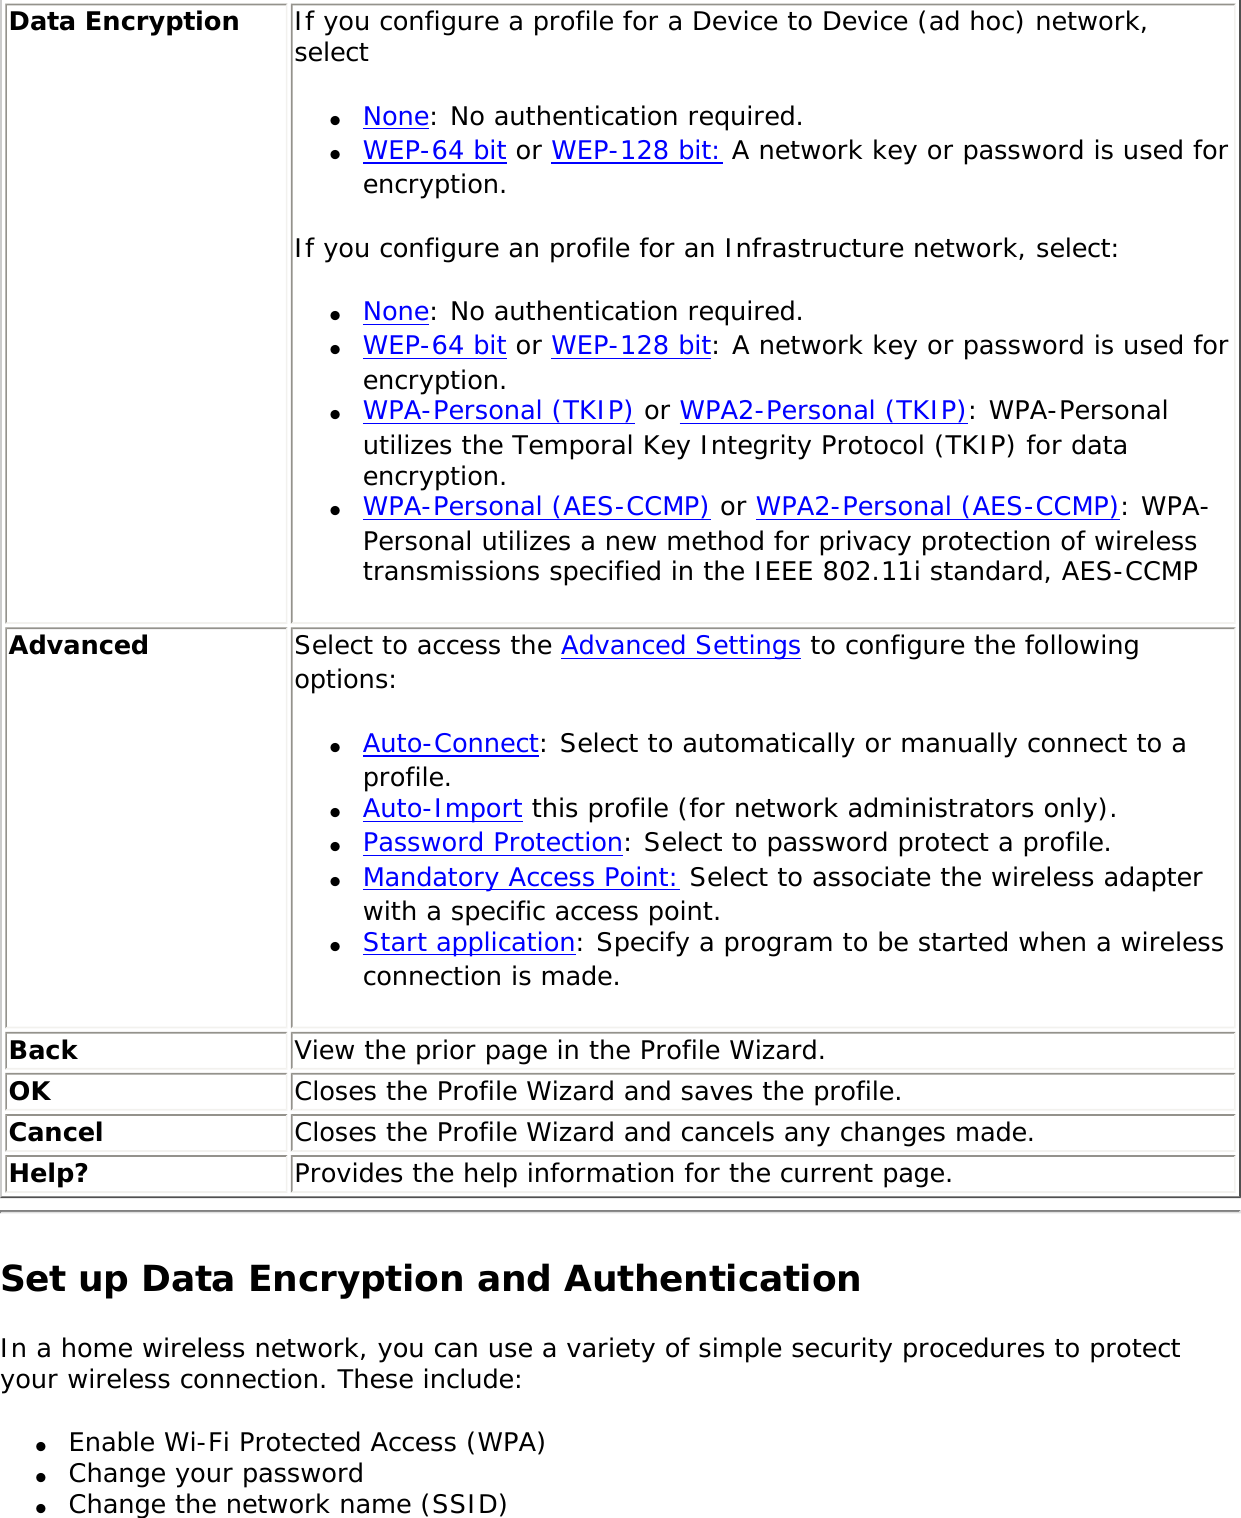 Data Encryption If you configure a profile for a Device to Device (ad hoc) network, select ●     None: No authentication required.●     WEP-64 bit or WEP-128 bit: A network key or password is used for encryption. If you configure an profile for an Infrastructure network, select: ●     None: No authentication required.●     WEP-64 bit or WEP-128 bit: A network key or password is used for encryption. ●     WPA-Personal (TKIP) or WPA2-Personal (TKIP): WPA-Personal utilizes the Temporal Key Integrity Protocol (TKIP) for data encryption. ●     WPA-Personal (AES-CCMP) or WPA2-Personal (AES-CCMP): WPA-Personal utilizes a new method for privacy protection of wireless transmissions specified in the IEEE 802.11i standard, AES-CCMPAdvanced  Select to access the Advanced Settings to configure the following options: ●     Auto-Connect: Select to automatically or manually connect to a profile. ●     Auto-Import this profile (for network administrators only).●     Password Protection: Select to password protect a profile. ●     Mandatory Access Point: Select to associate the wireless adapter with a specific access point.●     Start application: Specify a program to be started when a wireless connection is made.   Back  View the prior page in the Profile Wizard.OK  Closes the Profile Wizard and saves the profile.Cancel  Closes the Profile Wizard and cancels any changes made.Help? Provides the help information for the current page.Set up Data Encryption and AuthenticationIn a home wireless network, you can use a variety of simple security procedures to protect your wireless connection. These include: ●     Enable Wi-Fi Protected Access (WPA)●     Change your password●     Change the network name (SSID)